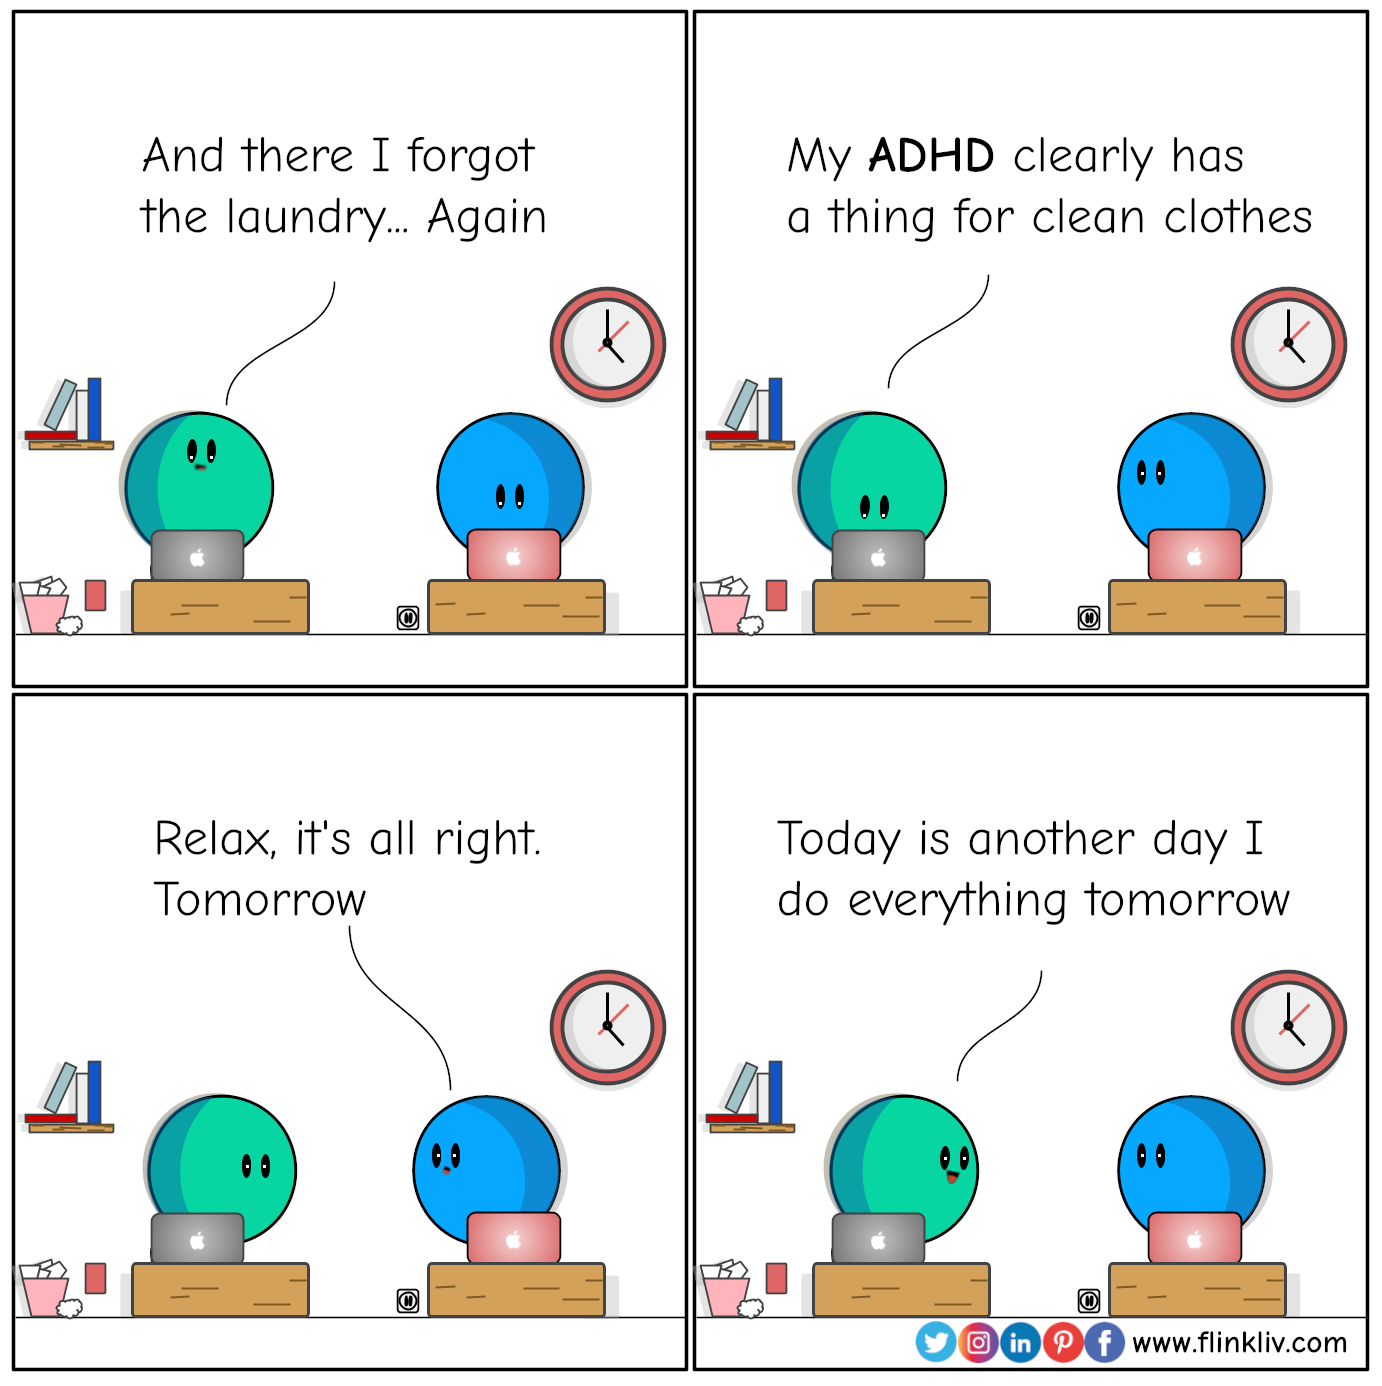 Conversation between A and B about ADHD and tasks.
							A: And there I forgot the laundry... again
							A: My ADHD clearly has a thing for clean clothes.
							B: Relax, it's all right. Tomorrow

							A: Today is another day I do everything tomorrow
				By Flinkliv.com
			